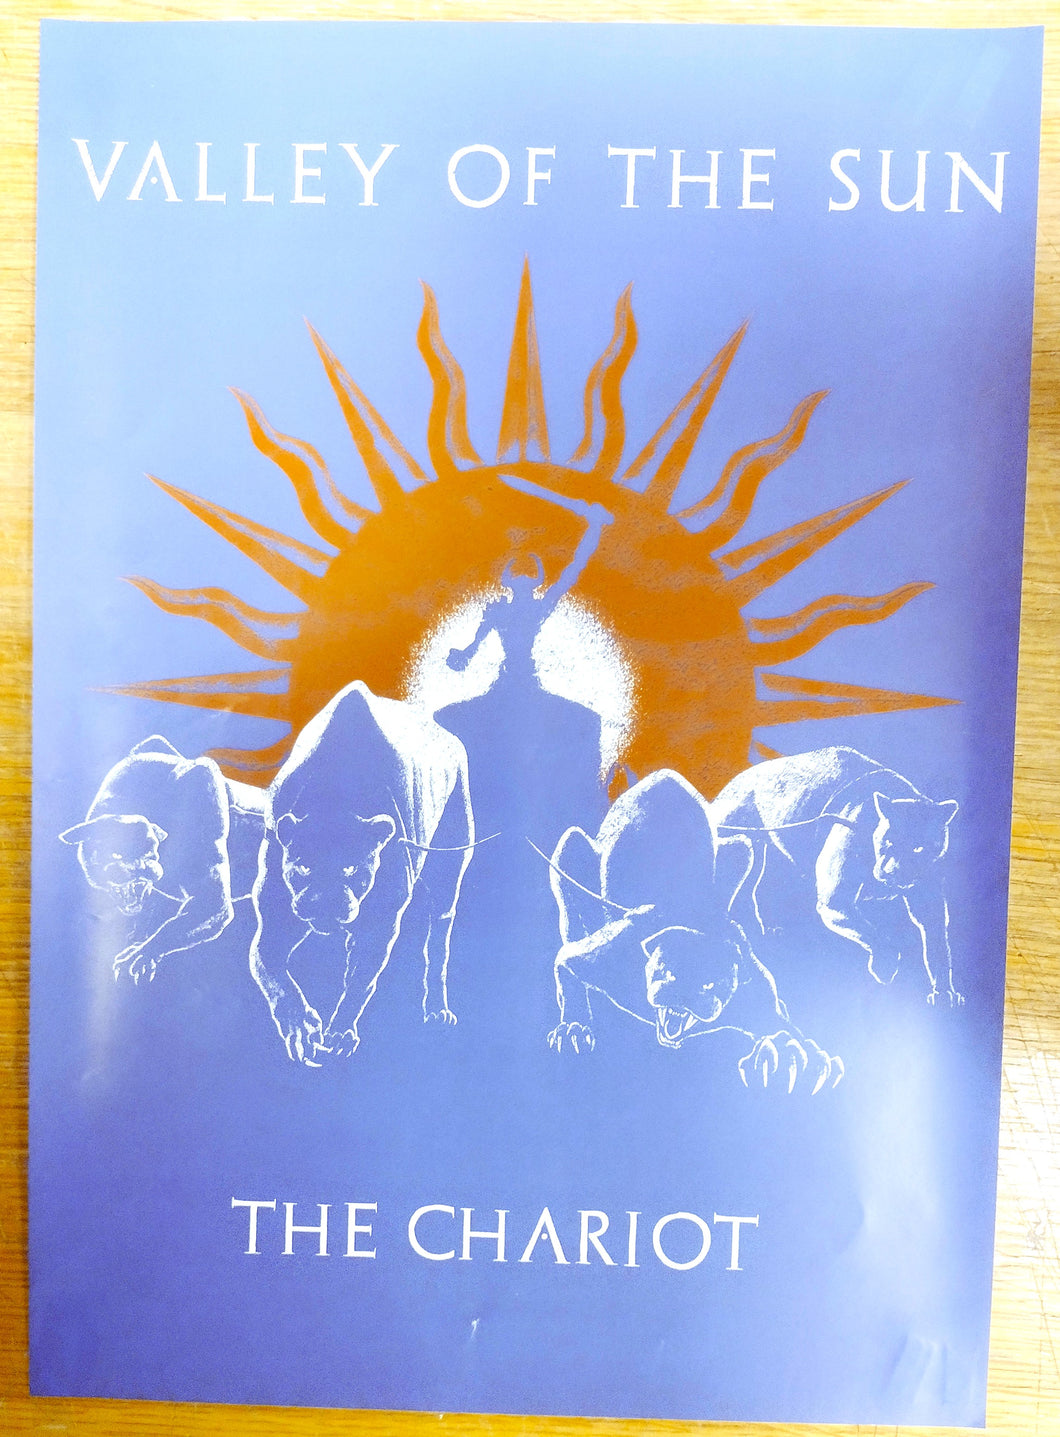 Valley Of The Sun - The Chariot (Poster)